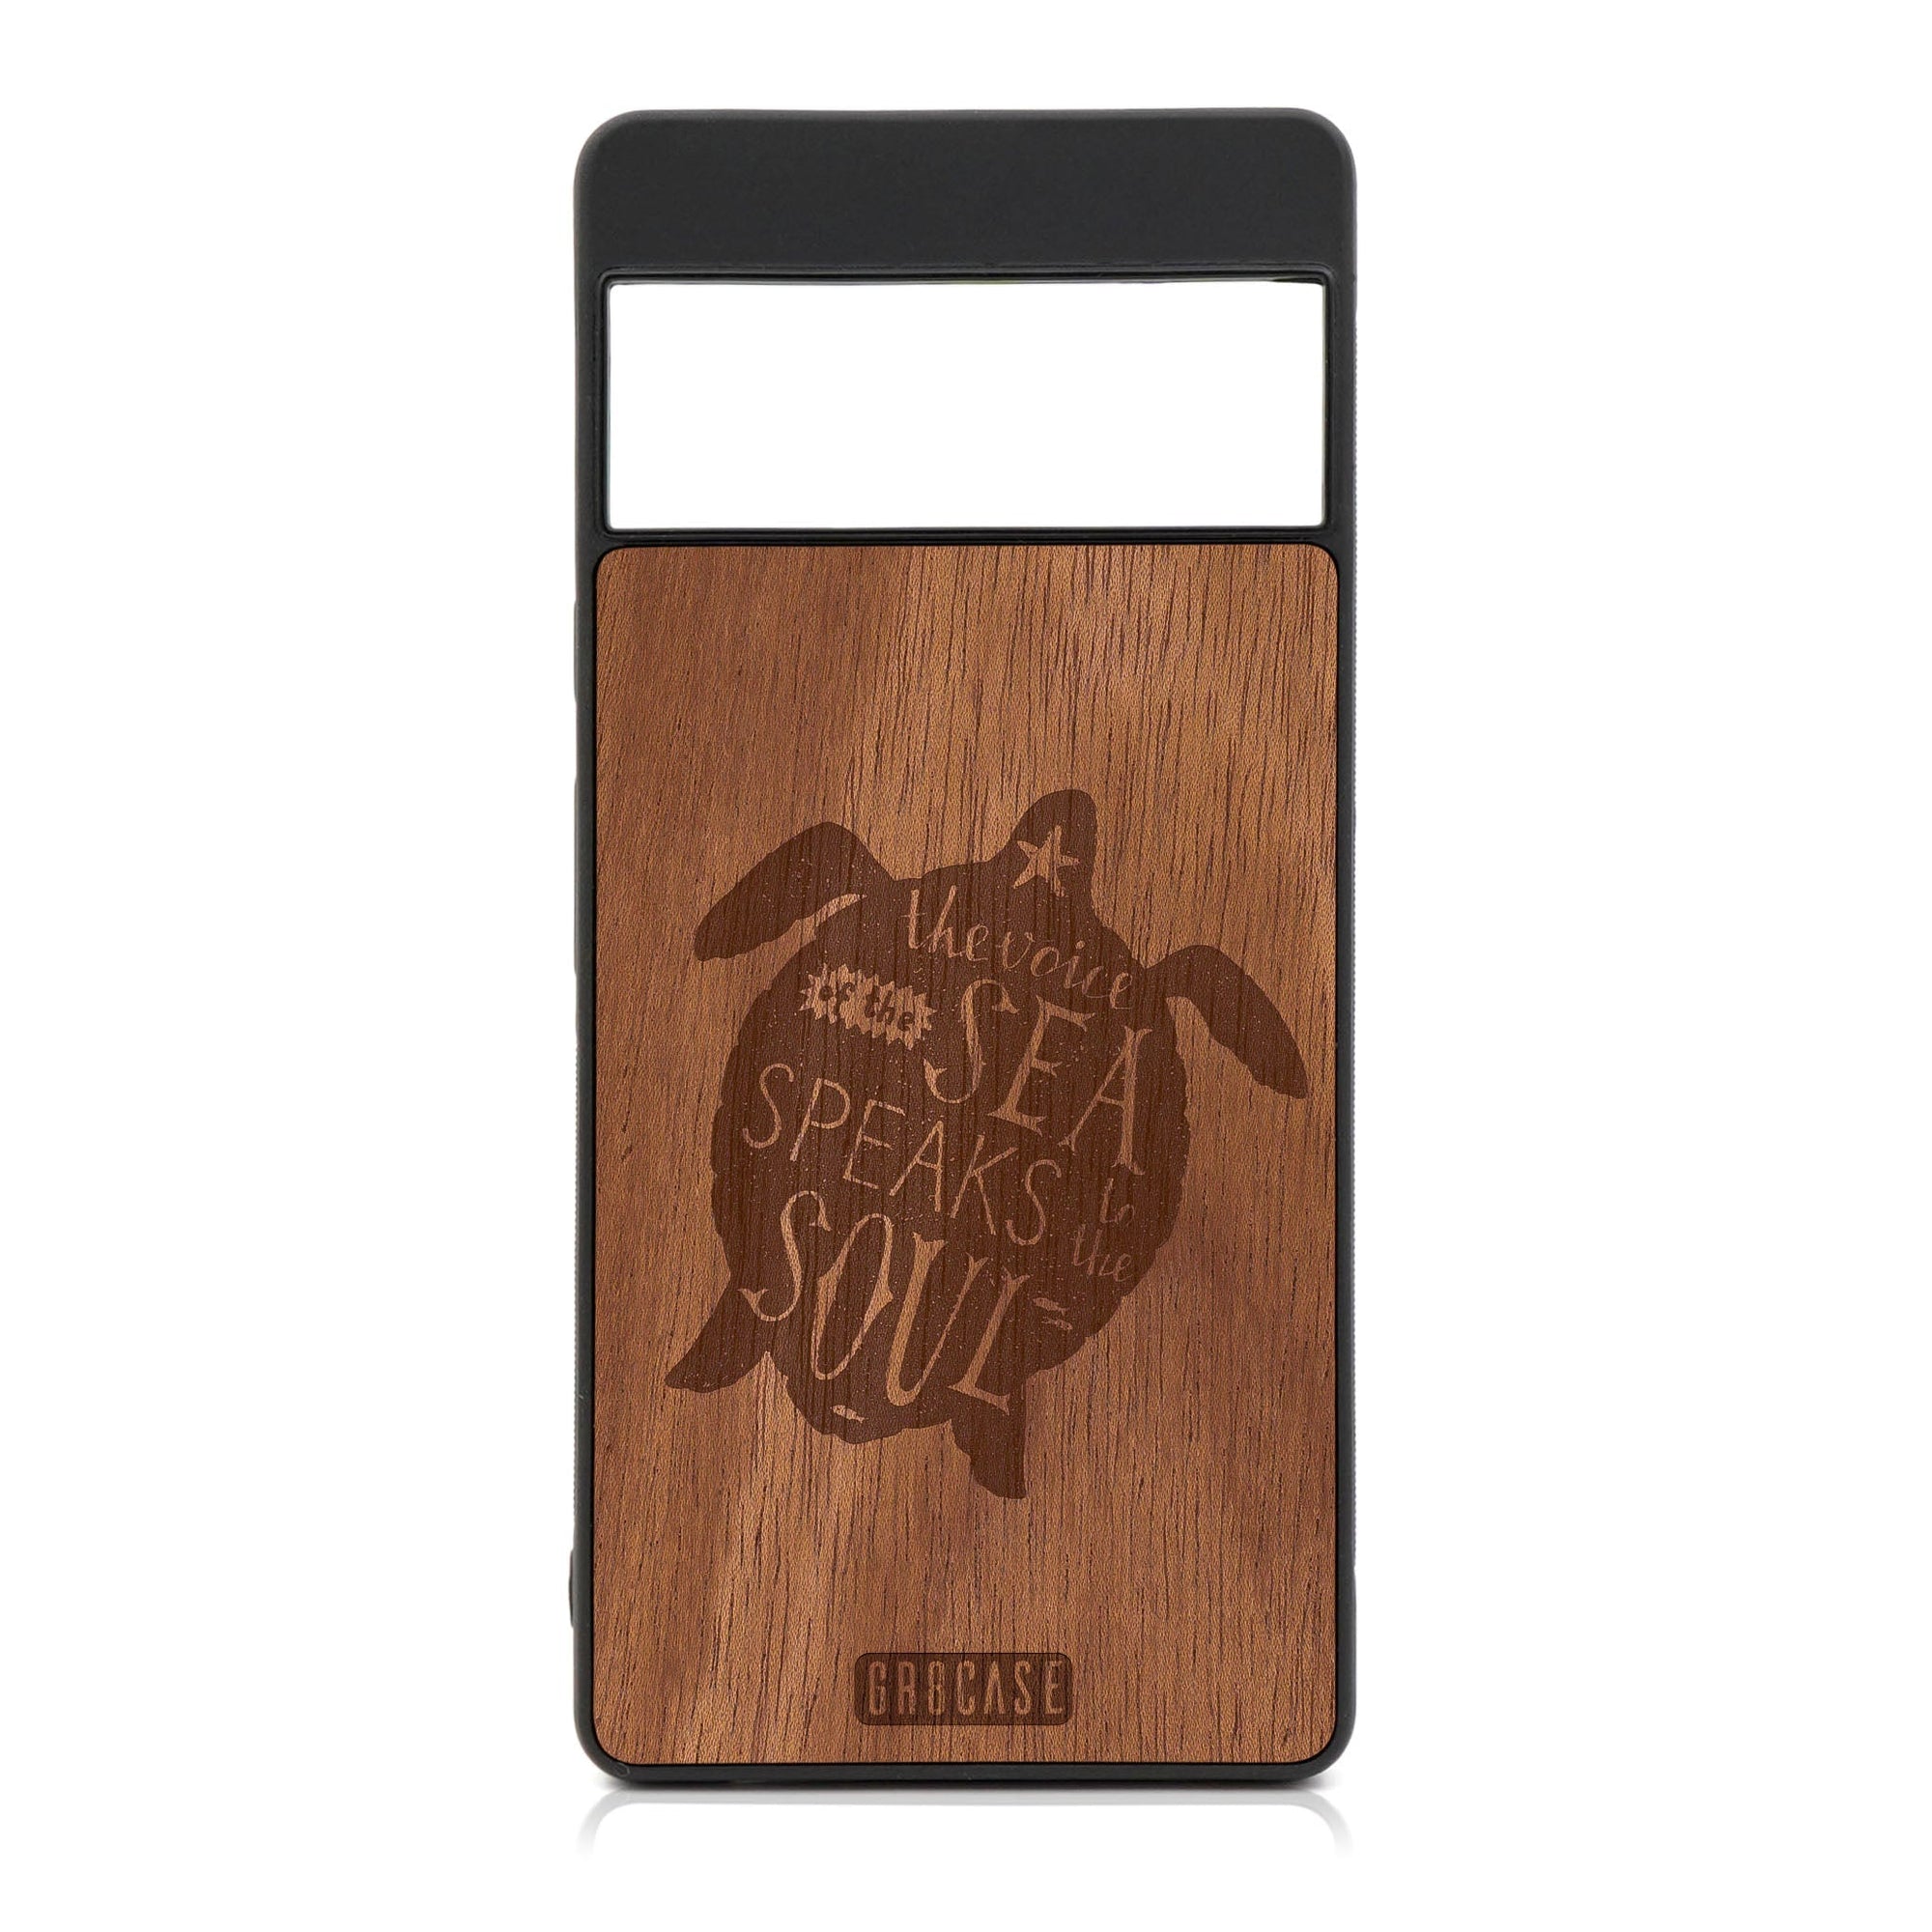 The Voice Of The Sea Speaks To The Soul (Turtle) Design Wood Case For Google Pixel 7